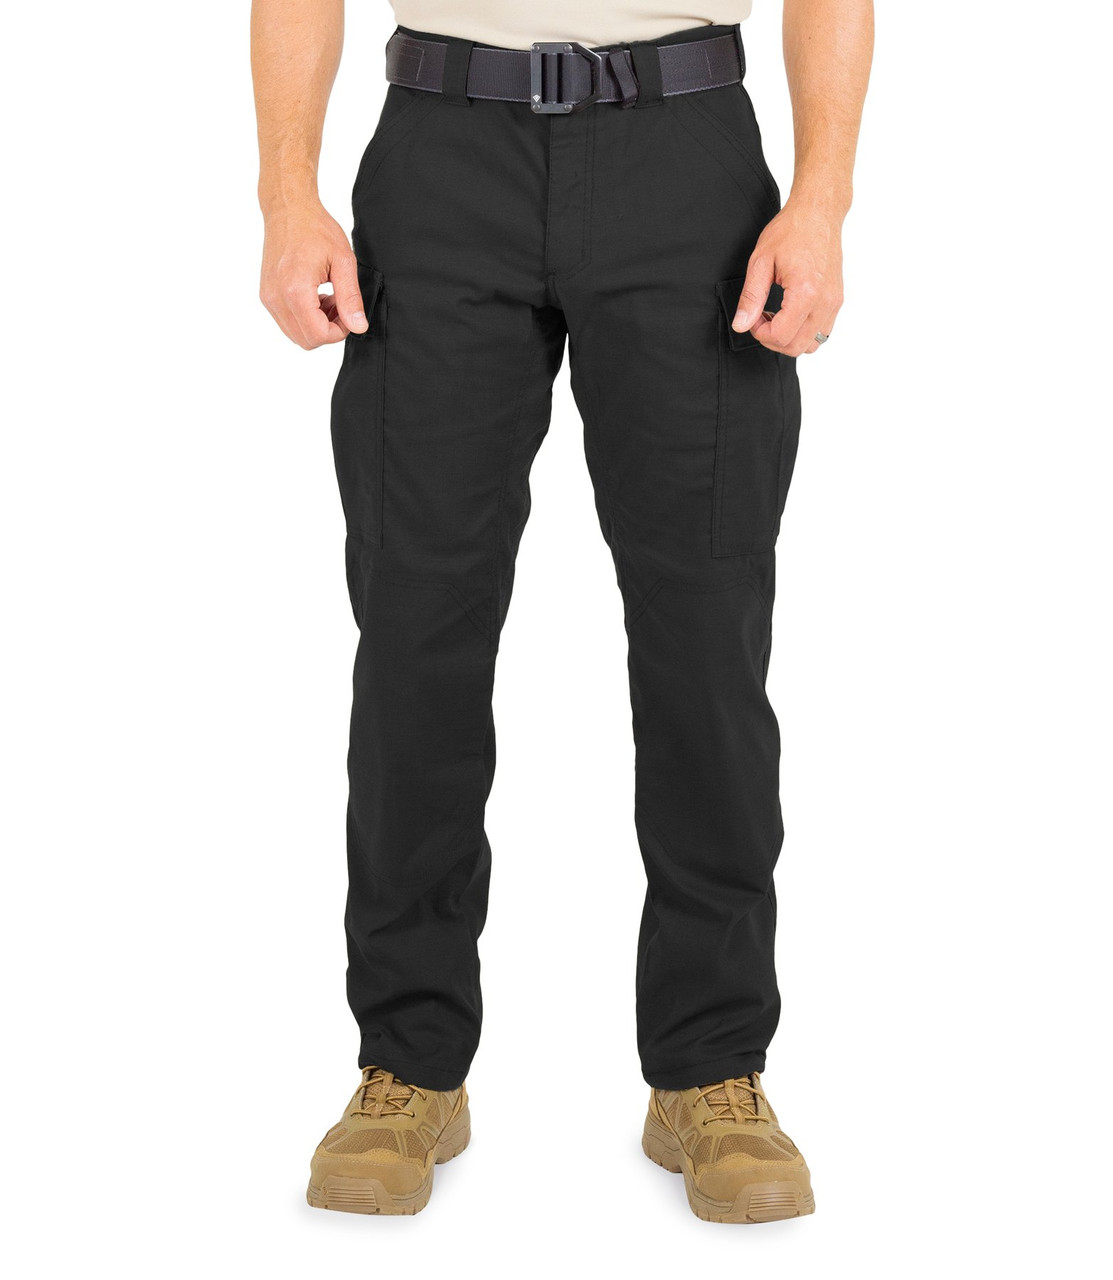 First Tactical 114012 Mens V2 BDU Pant, Stretch Waist, Polyester/Cotton, available in Black, Midnight Navy Blue, Khaki Brown, and OD Green